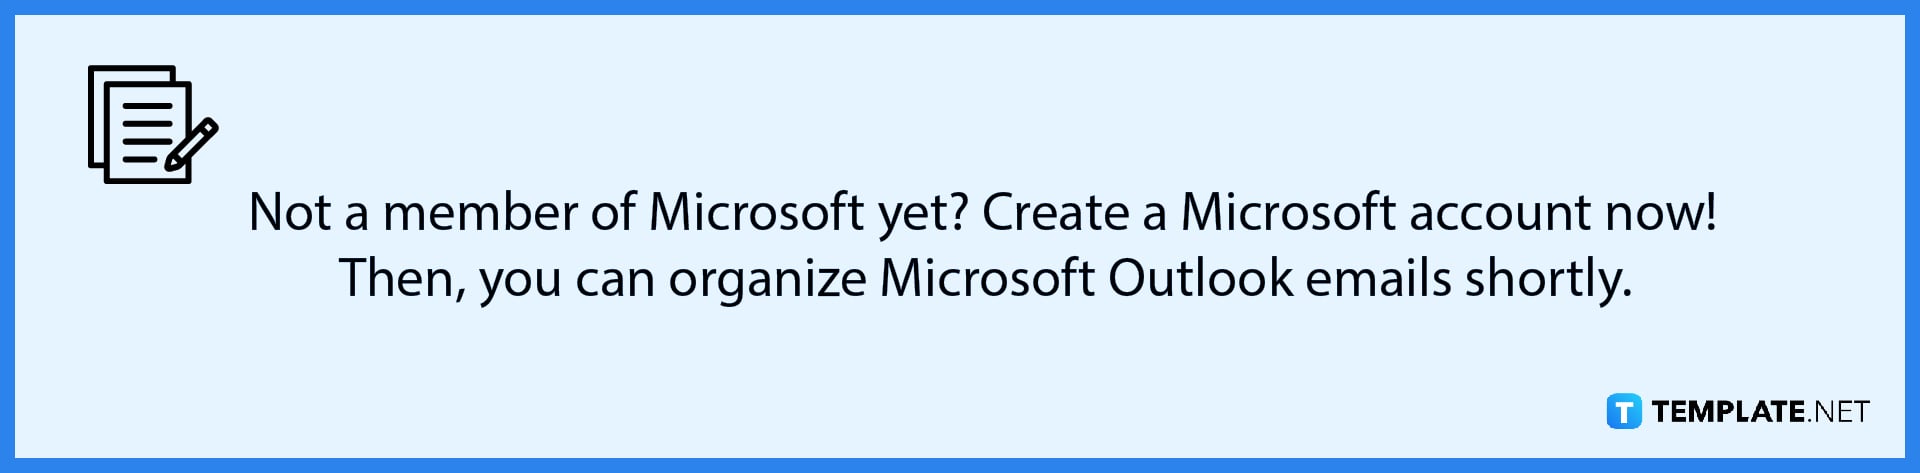 how-to-stop-spam-email-in-microsoft-outlook-note-1